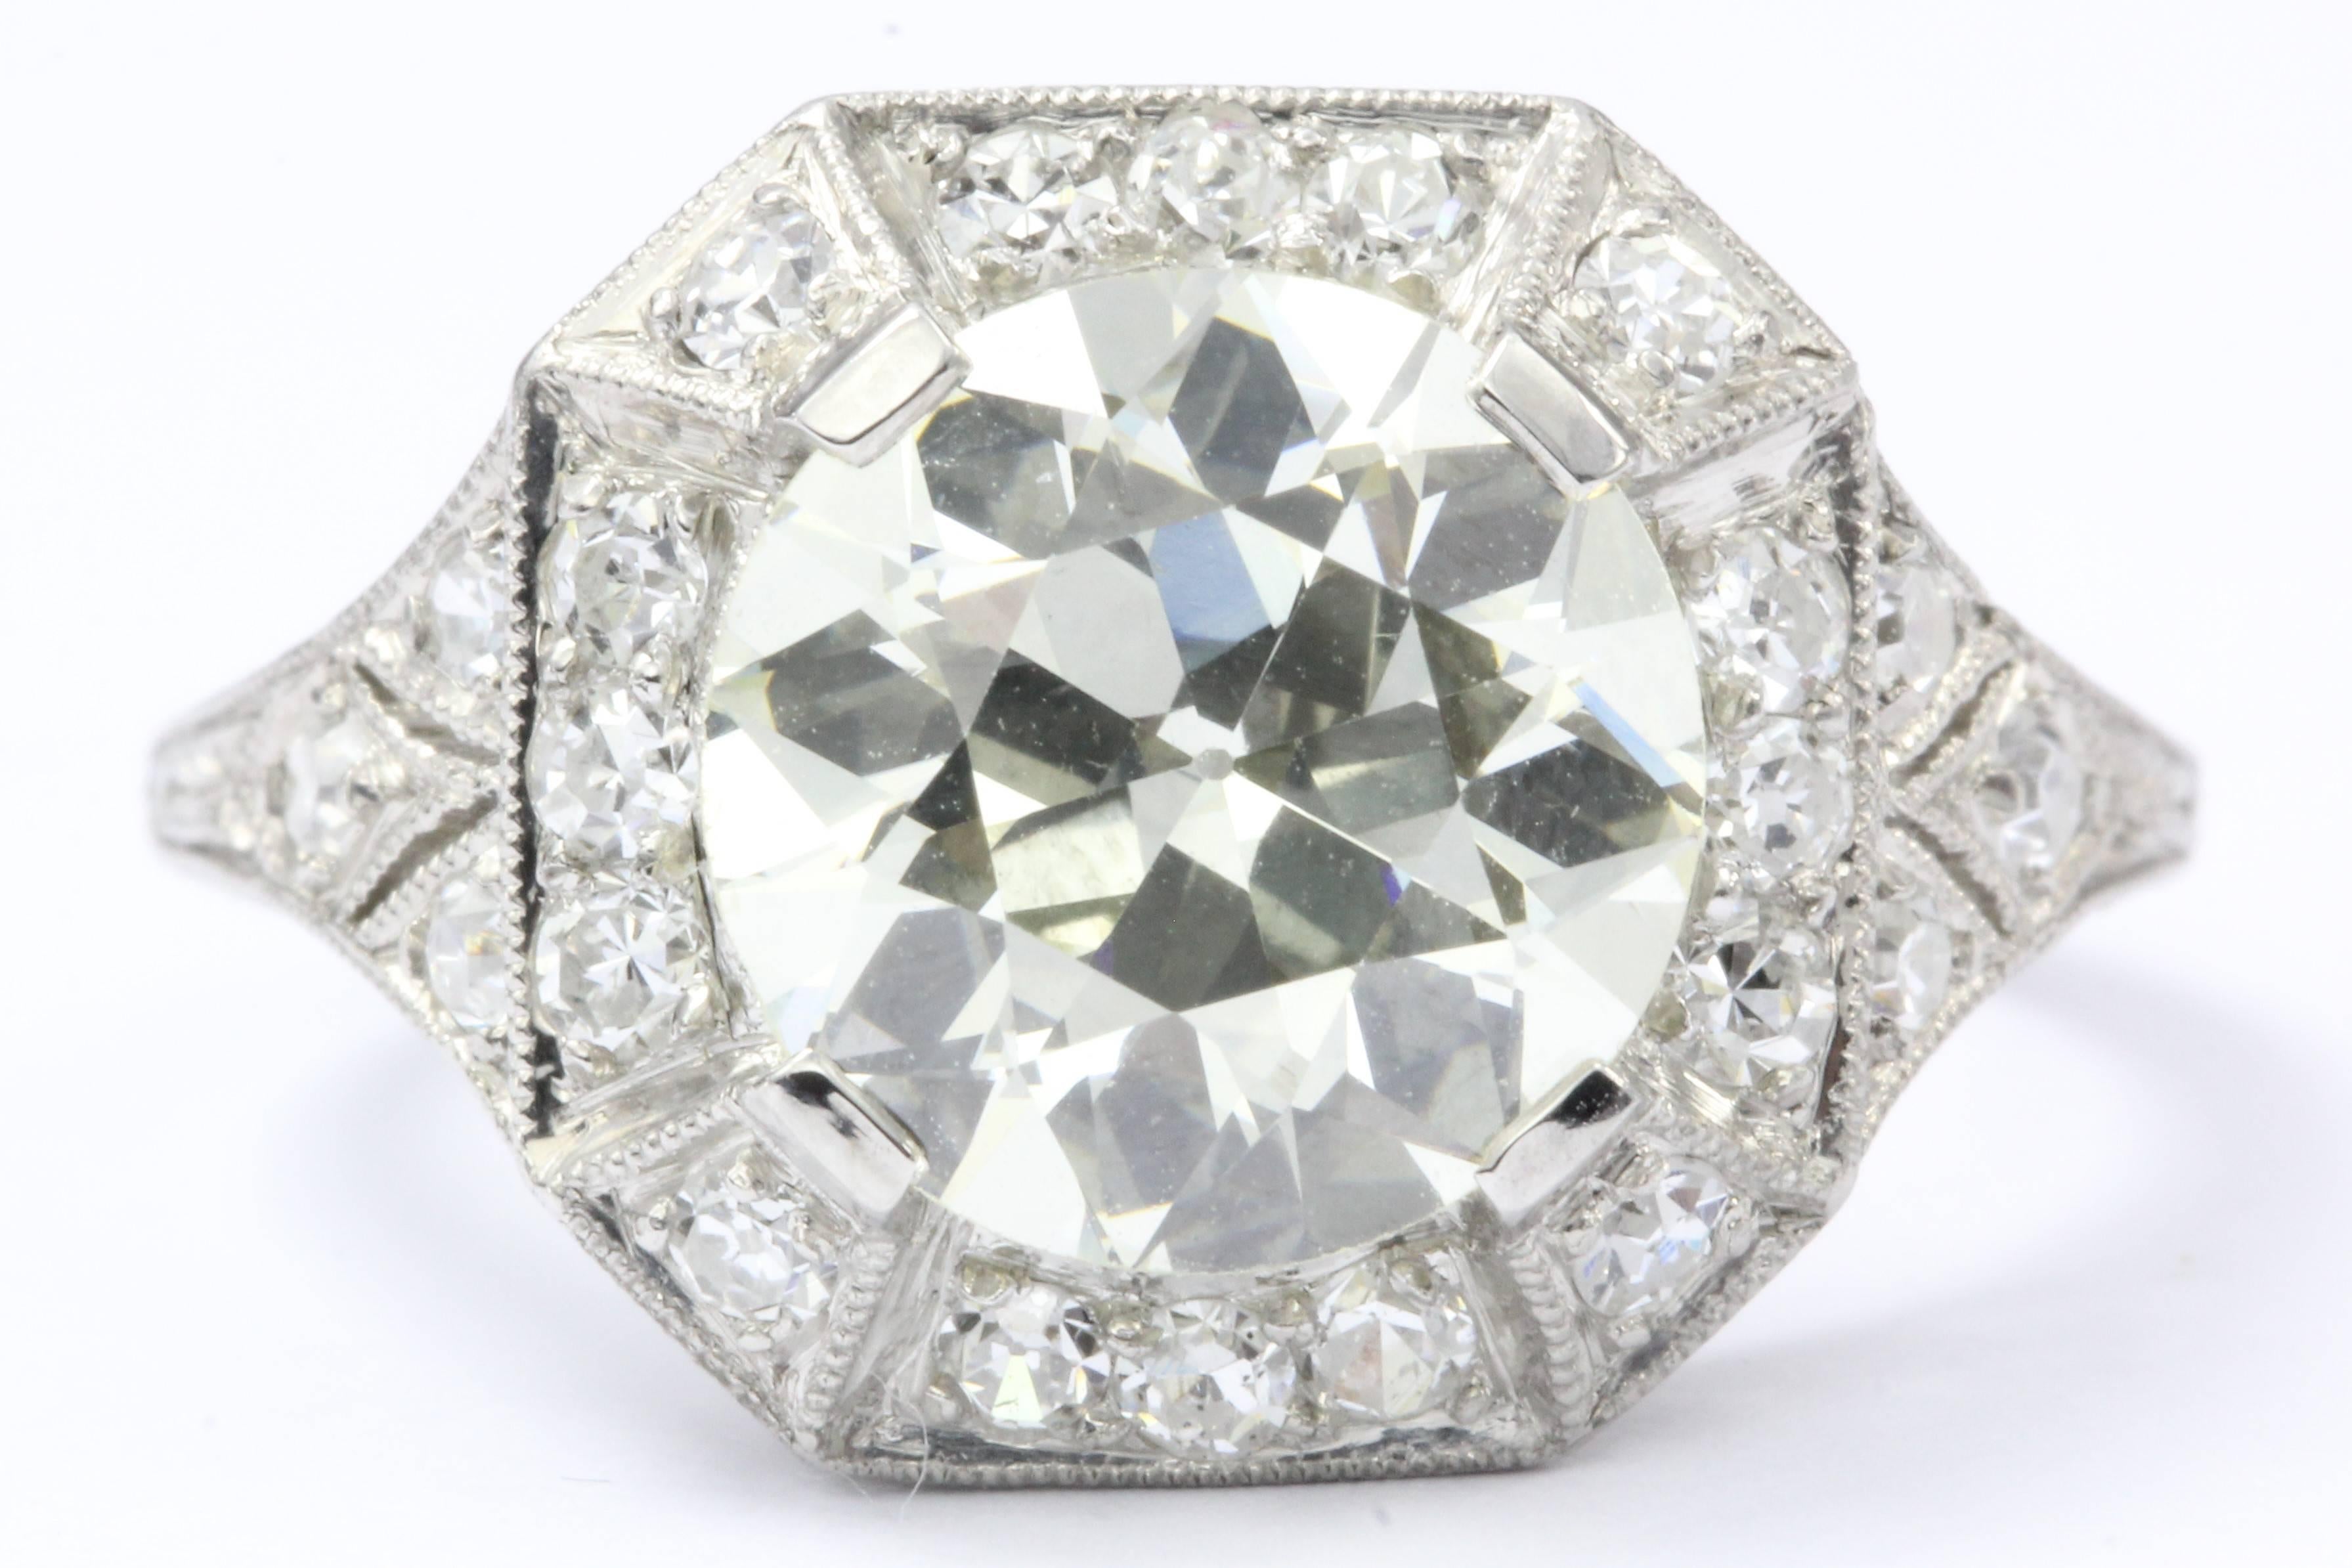 Art Deco platinum 2.86 Carat Old European Diamond Engagement Ring. The ring is in excellent estate condition and ready to wear. The design is still sharp and has no signs of wear. The main diamond is approximately 2.86 carats Vs clarity, L/M color.